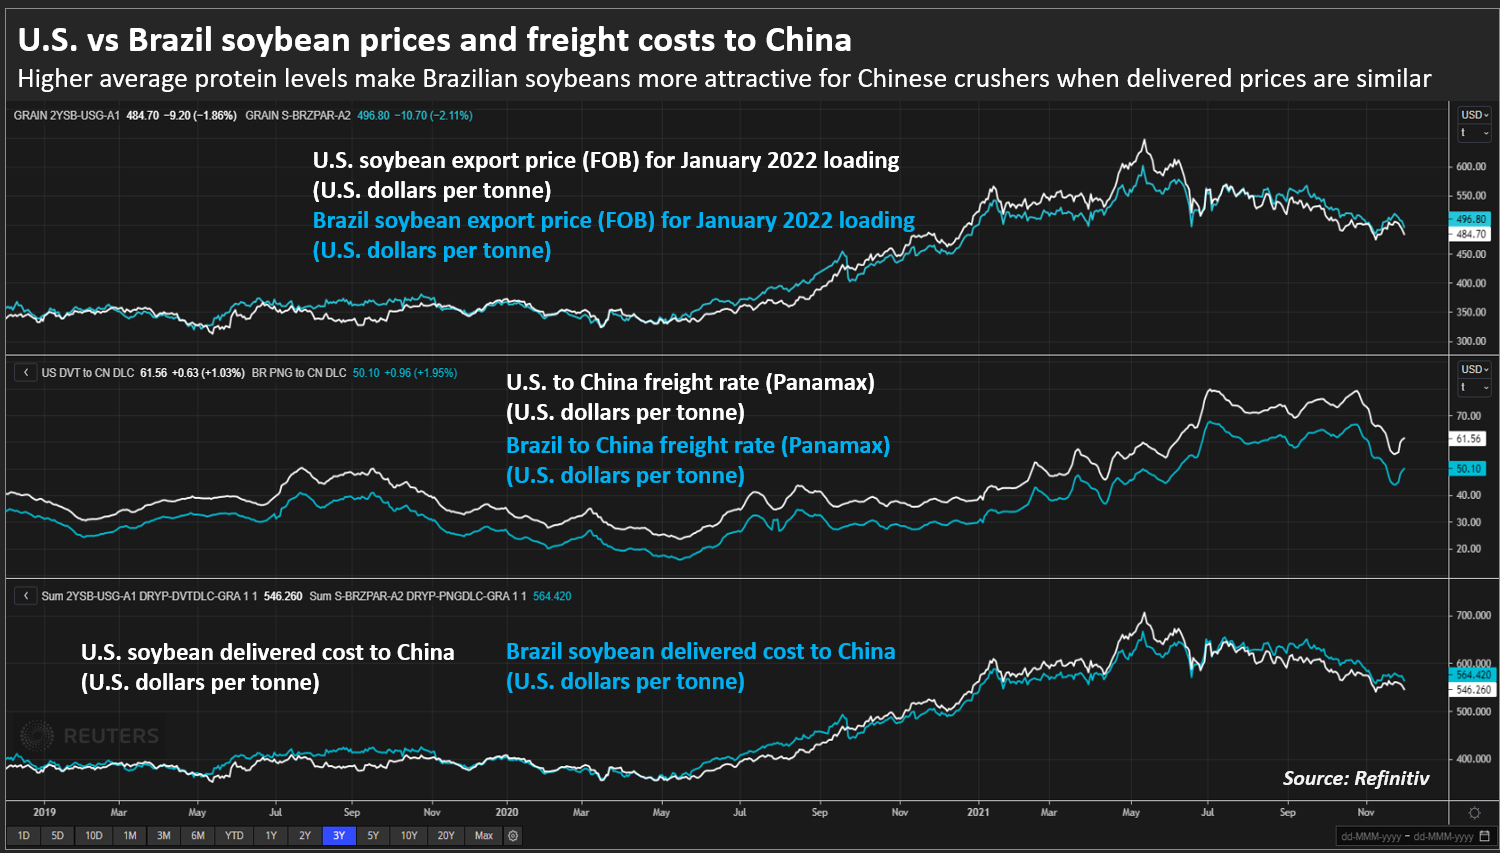 U.S. vs Brazil soybean prices and freight costs to China